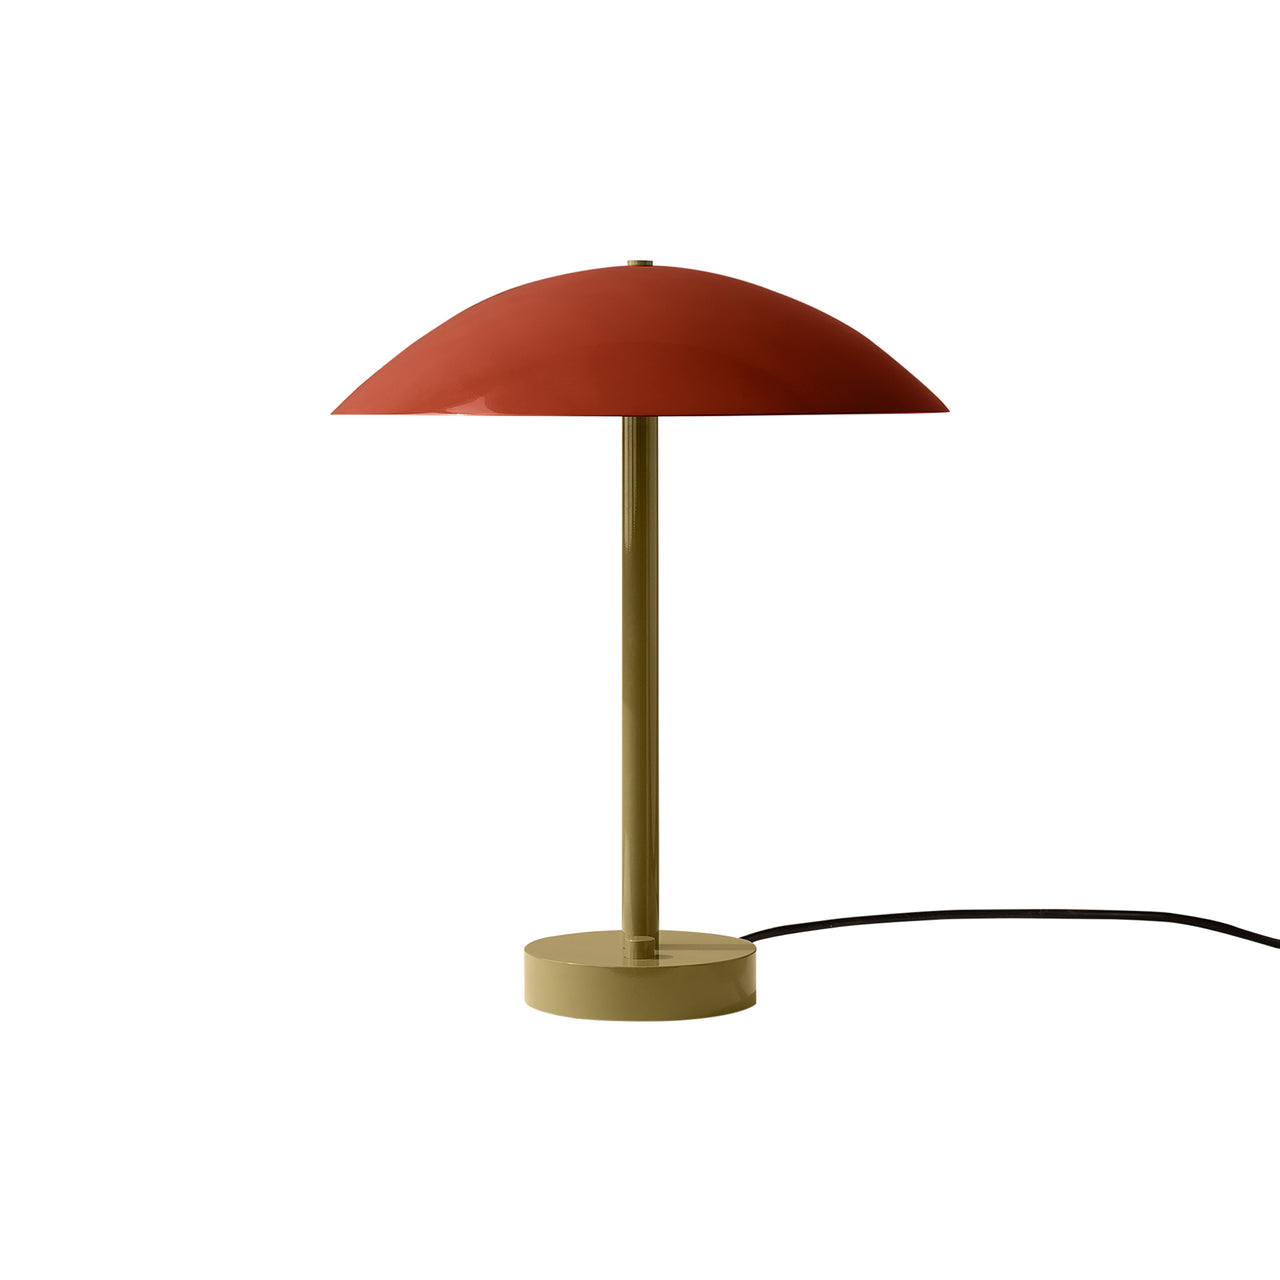 Arundel Table Lamp: Oxide Red + Reed Greed